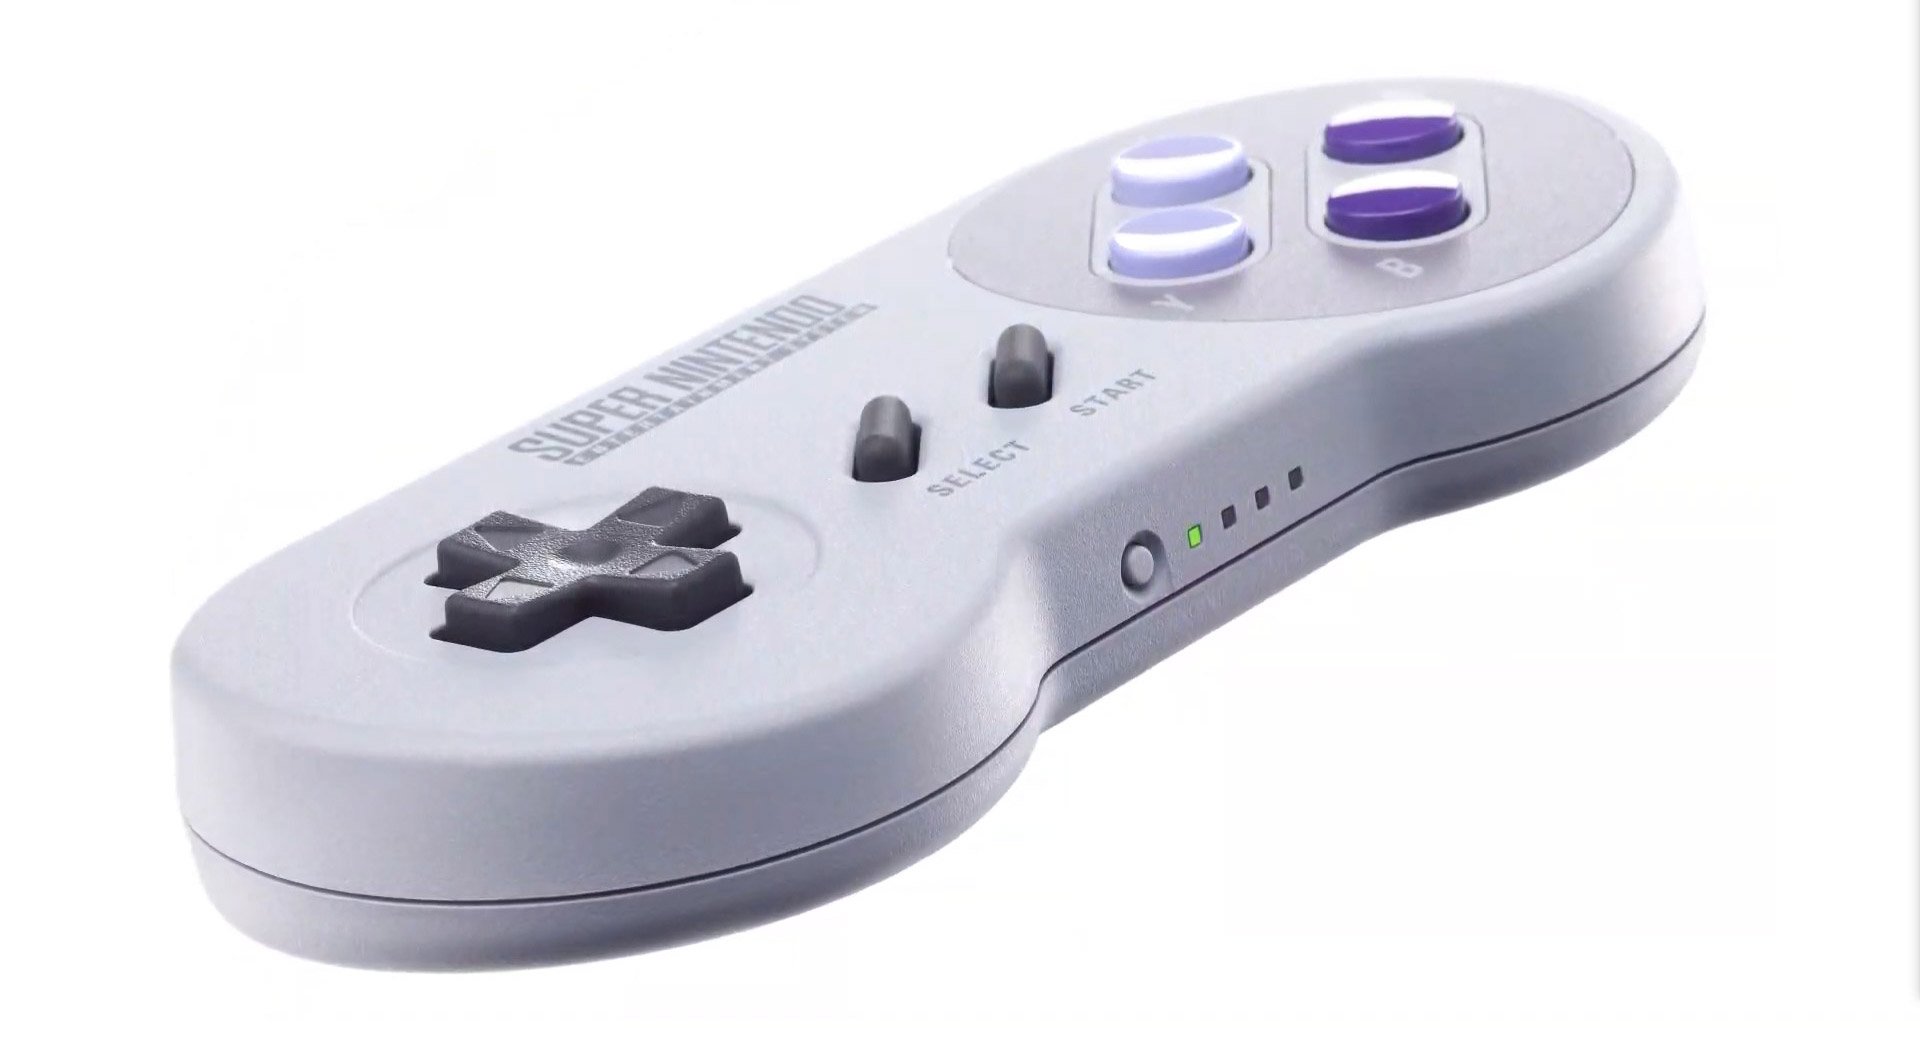 The official SNES controller for Nintendo Switch